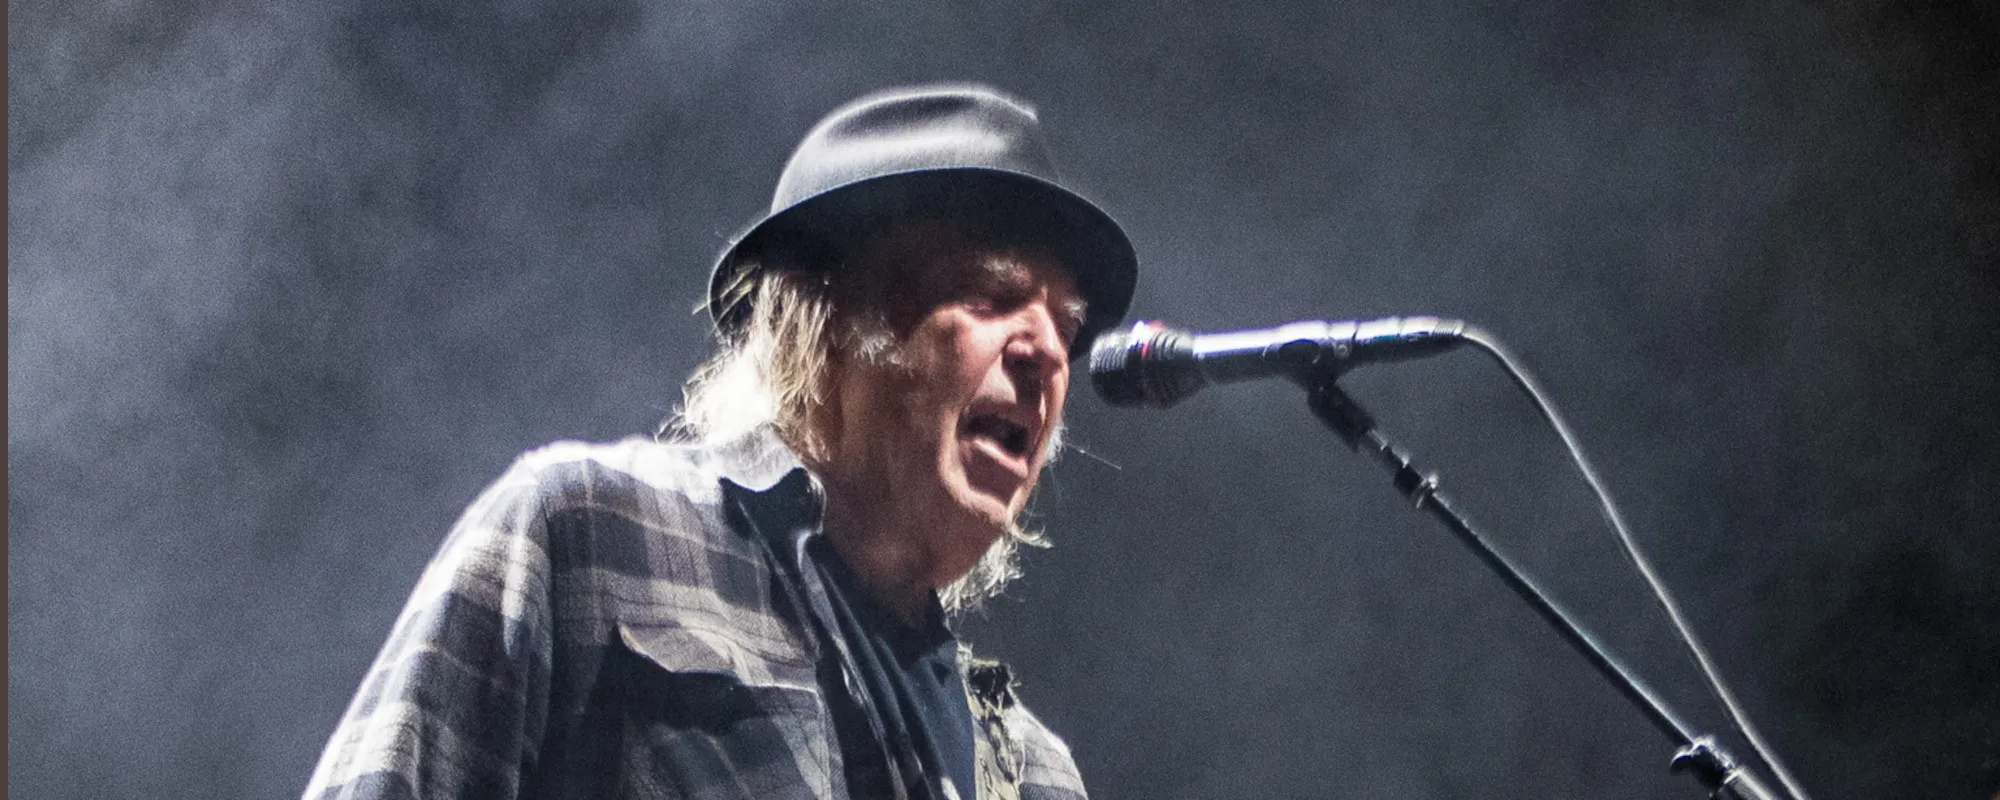 Neil Young Pays Tribute To Gordon Lightfoot: “A Canadian Legend”